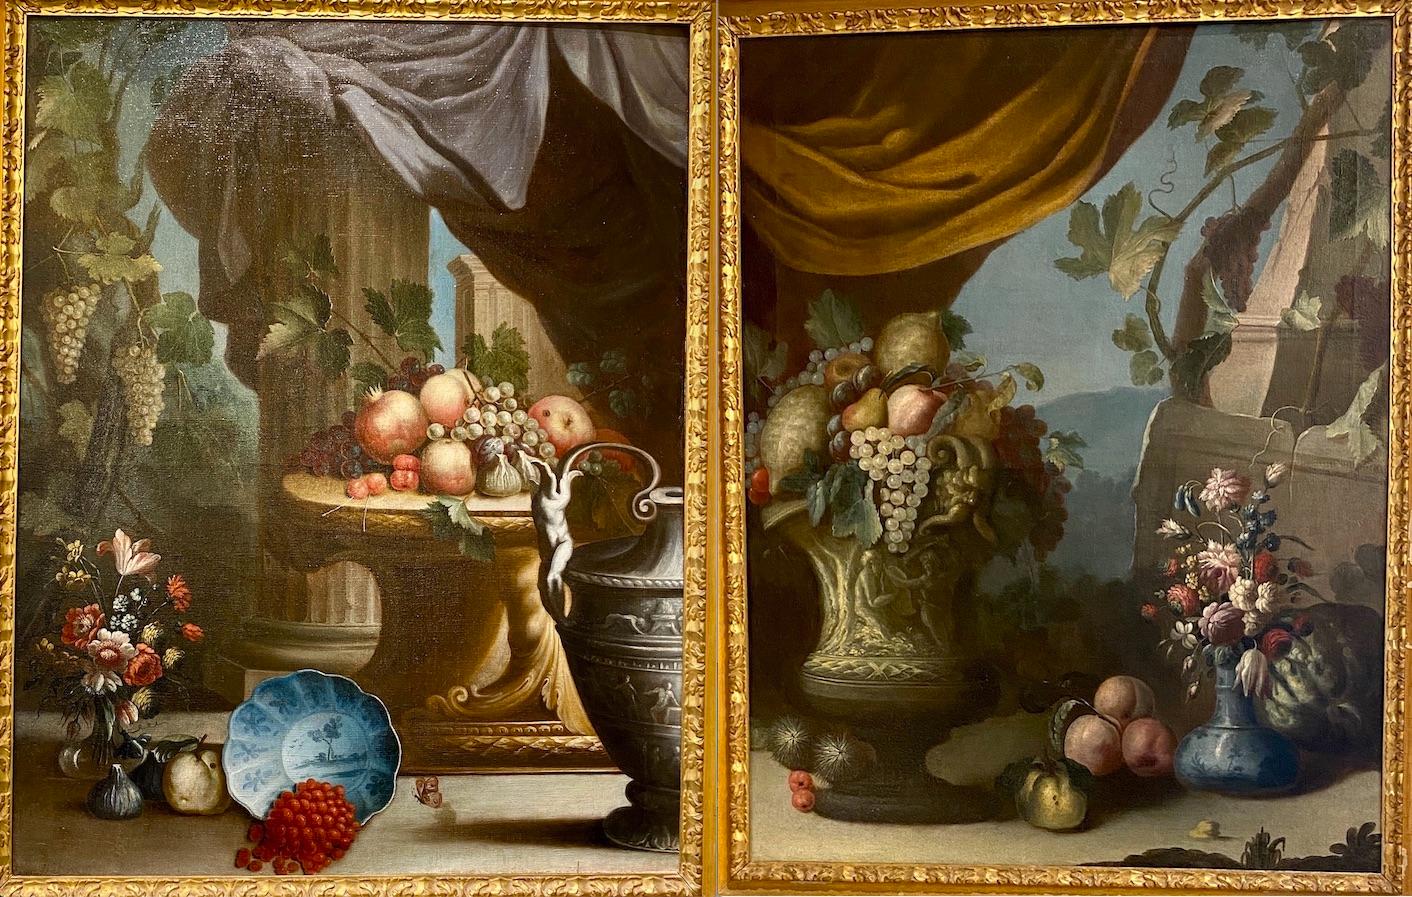 Pair of Exceptional Italian 18th Century Still-Life Paintings 